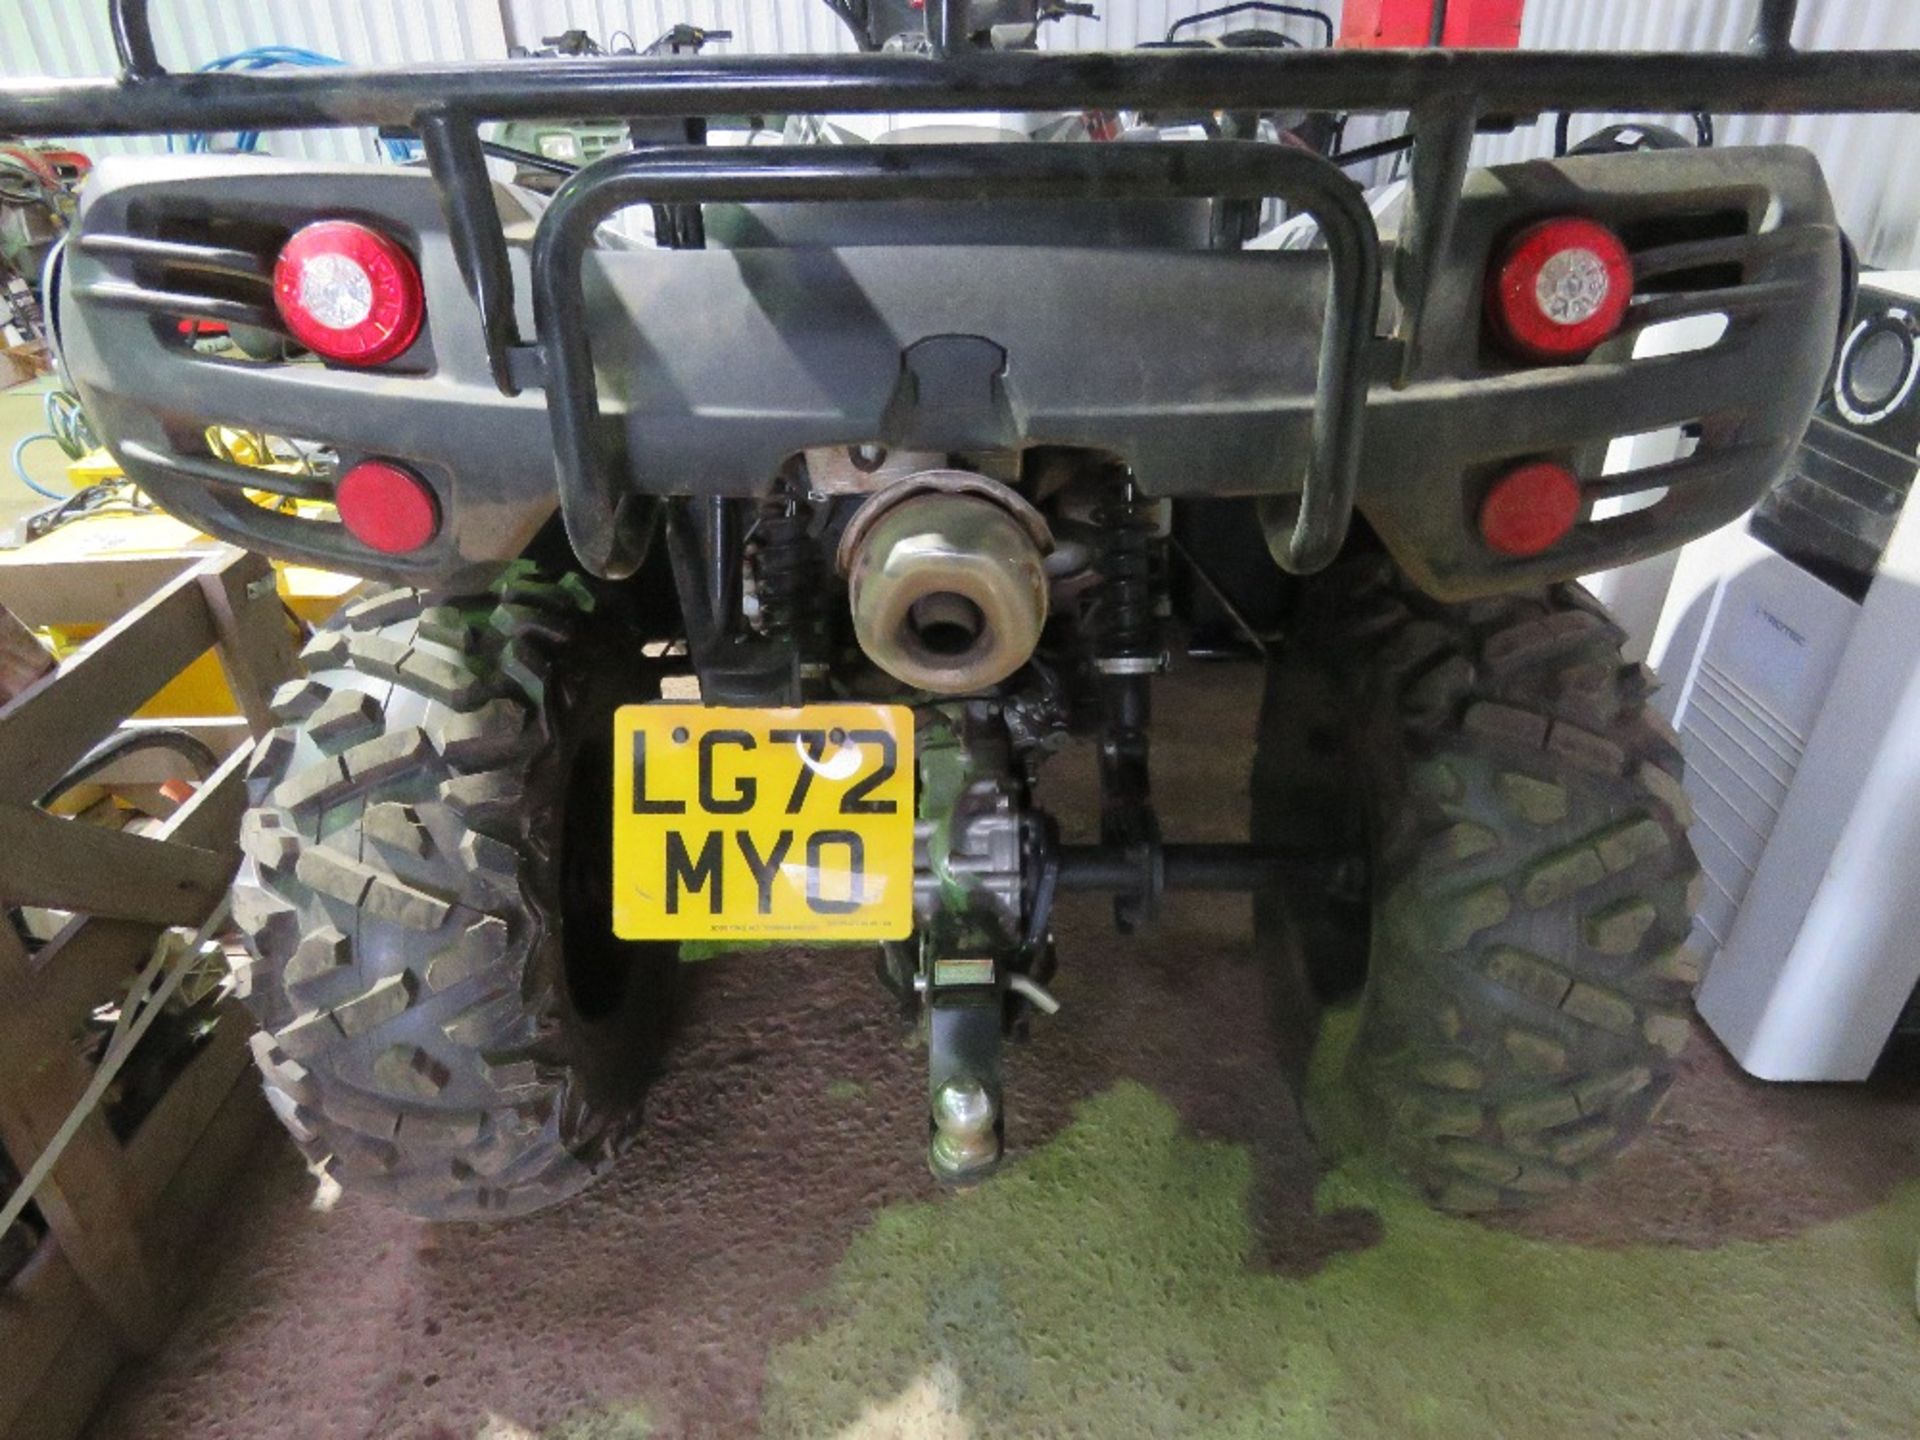 TGB BLADE 520SL EPS 4WD QUAD BIKE, 164 REC MILES FROM NEW. REG:LG72 MYO. WHEN TESTED WAS SEEN TO STA - Image 7 of 7